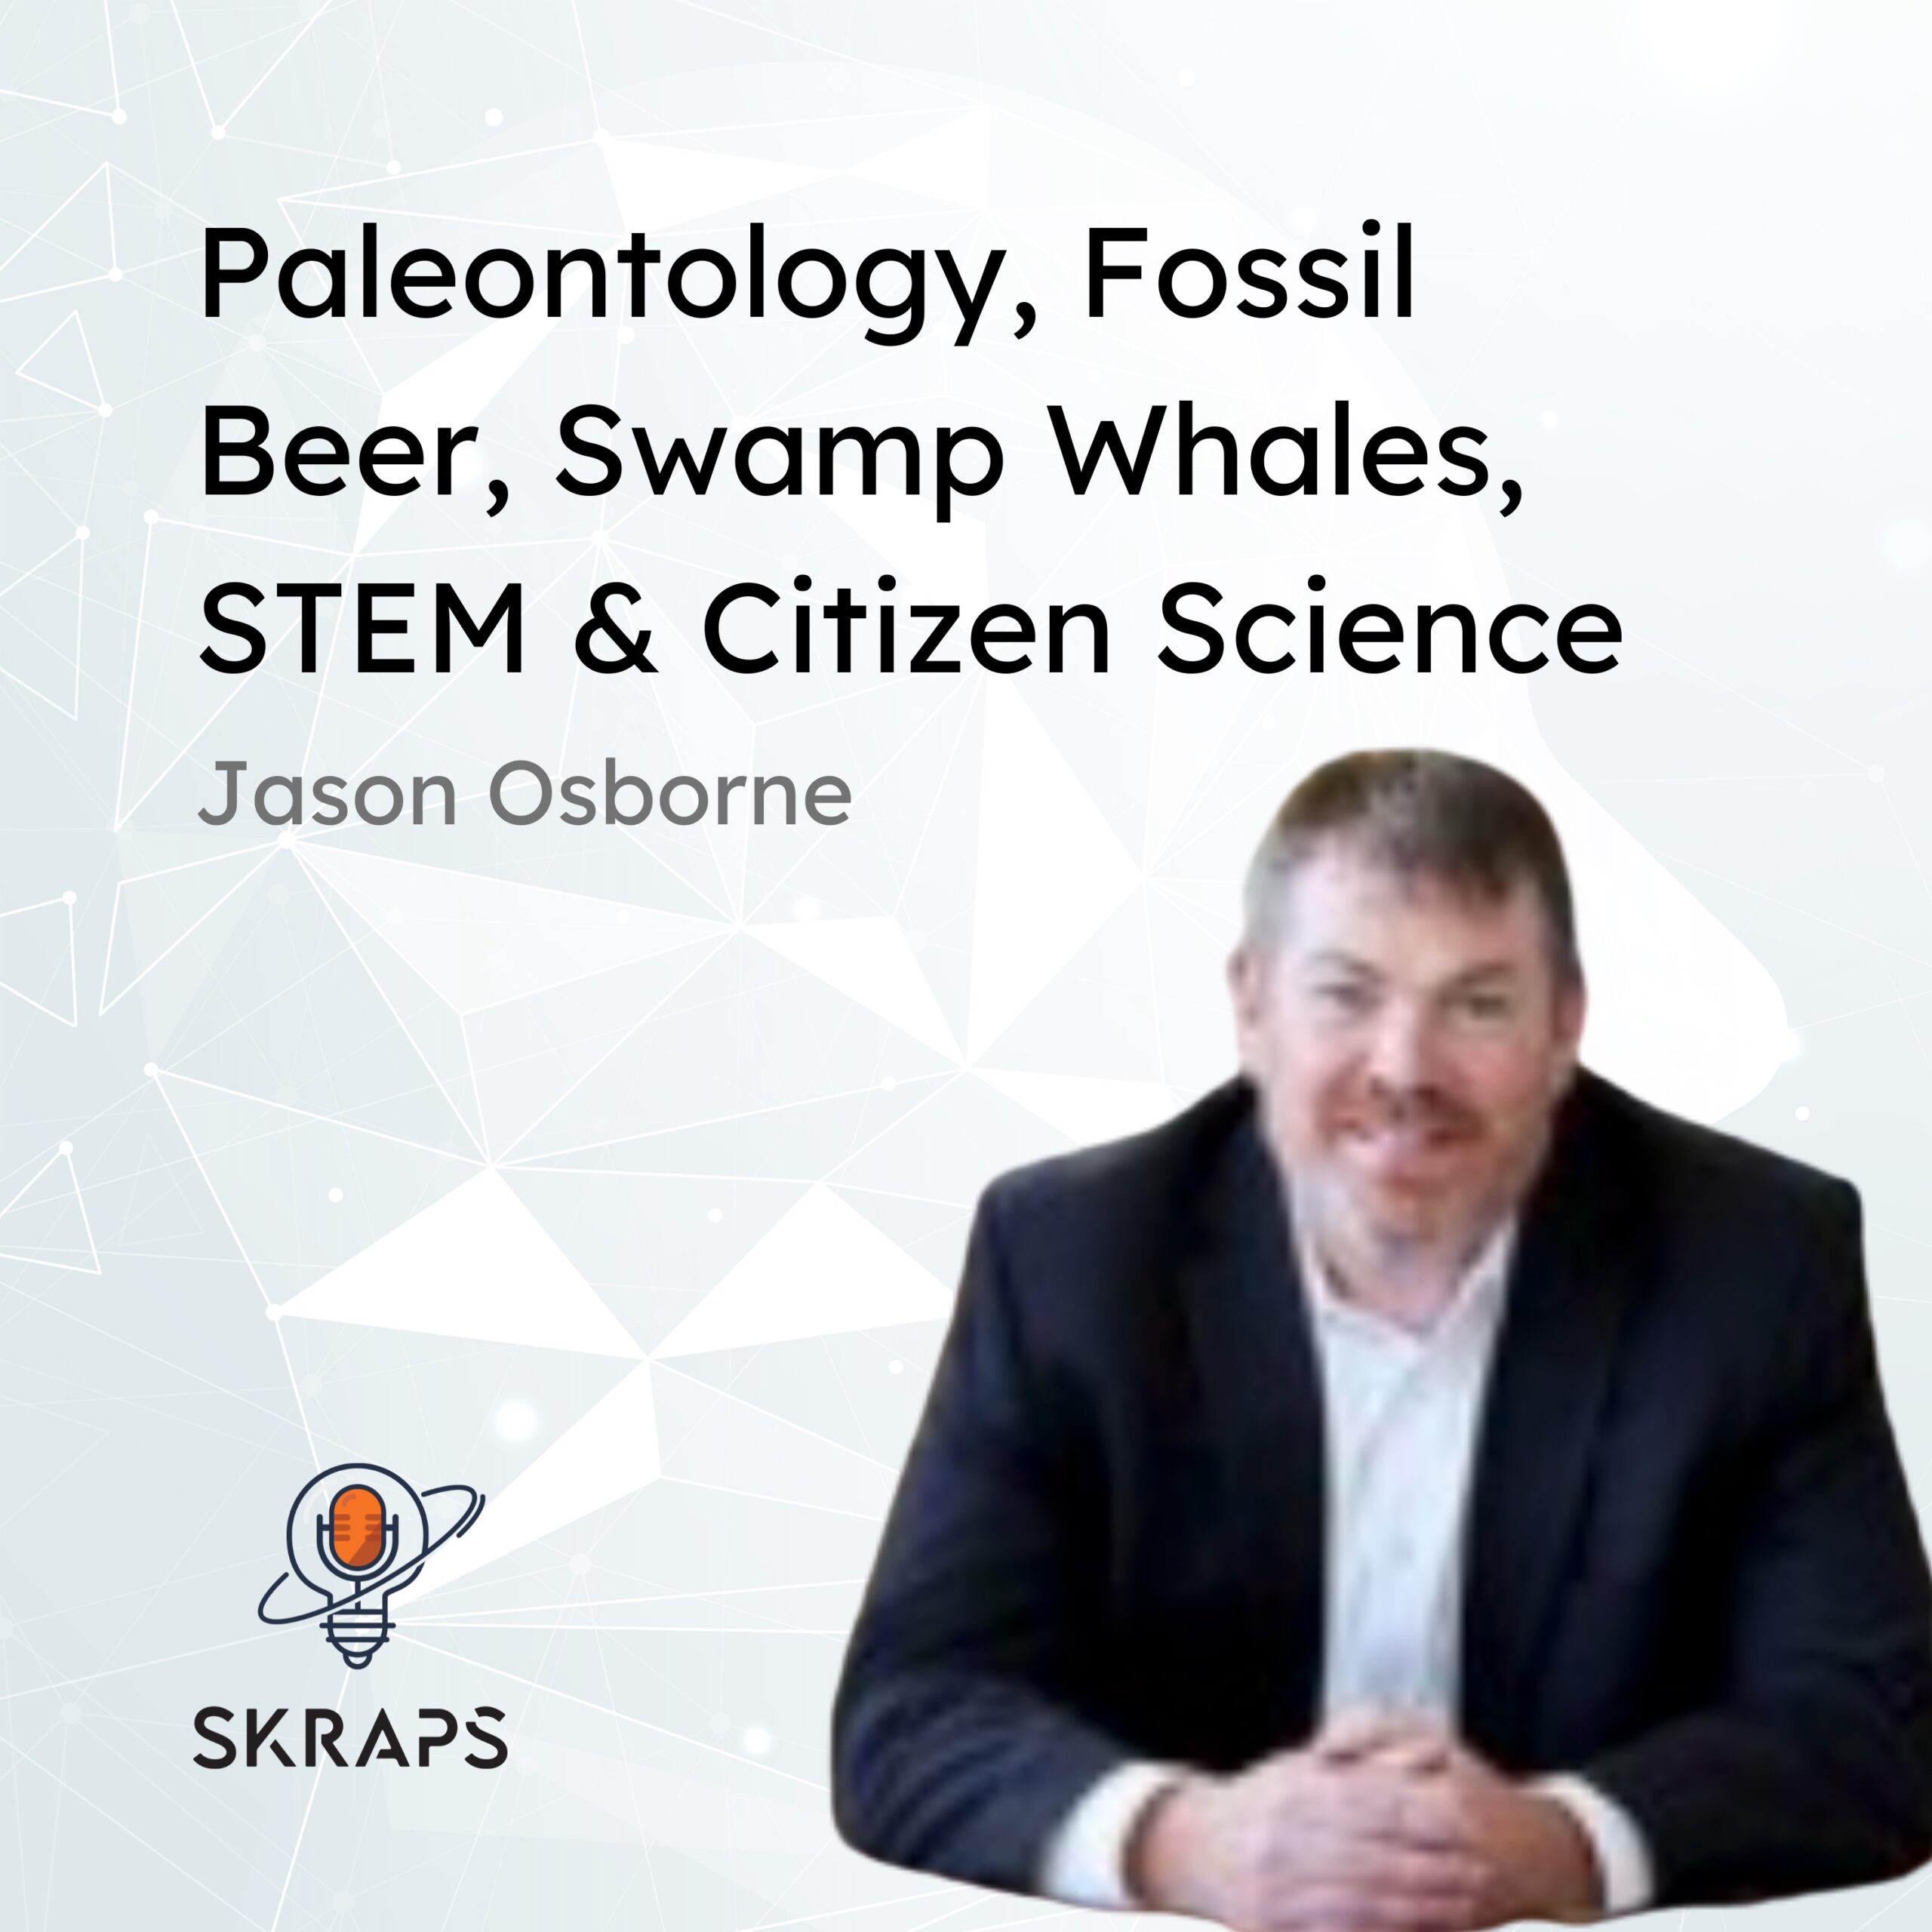 Paleontology, Dinosaur beer, Swamp Whales, Science, STEM education, and Citizen Science